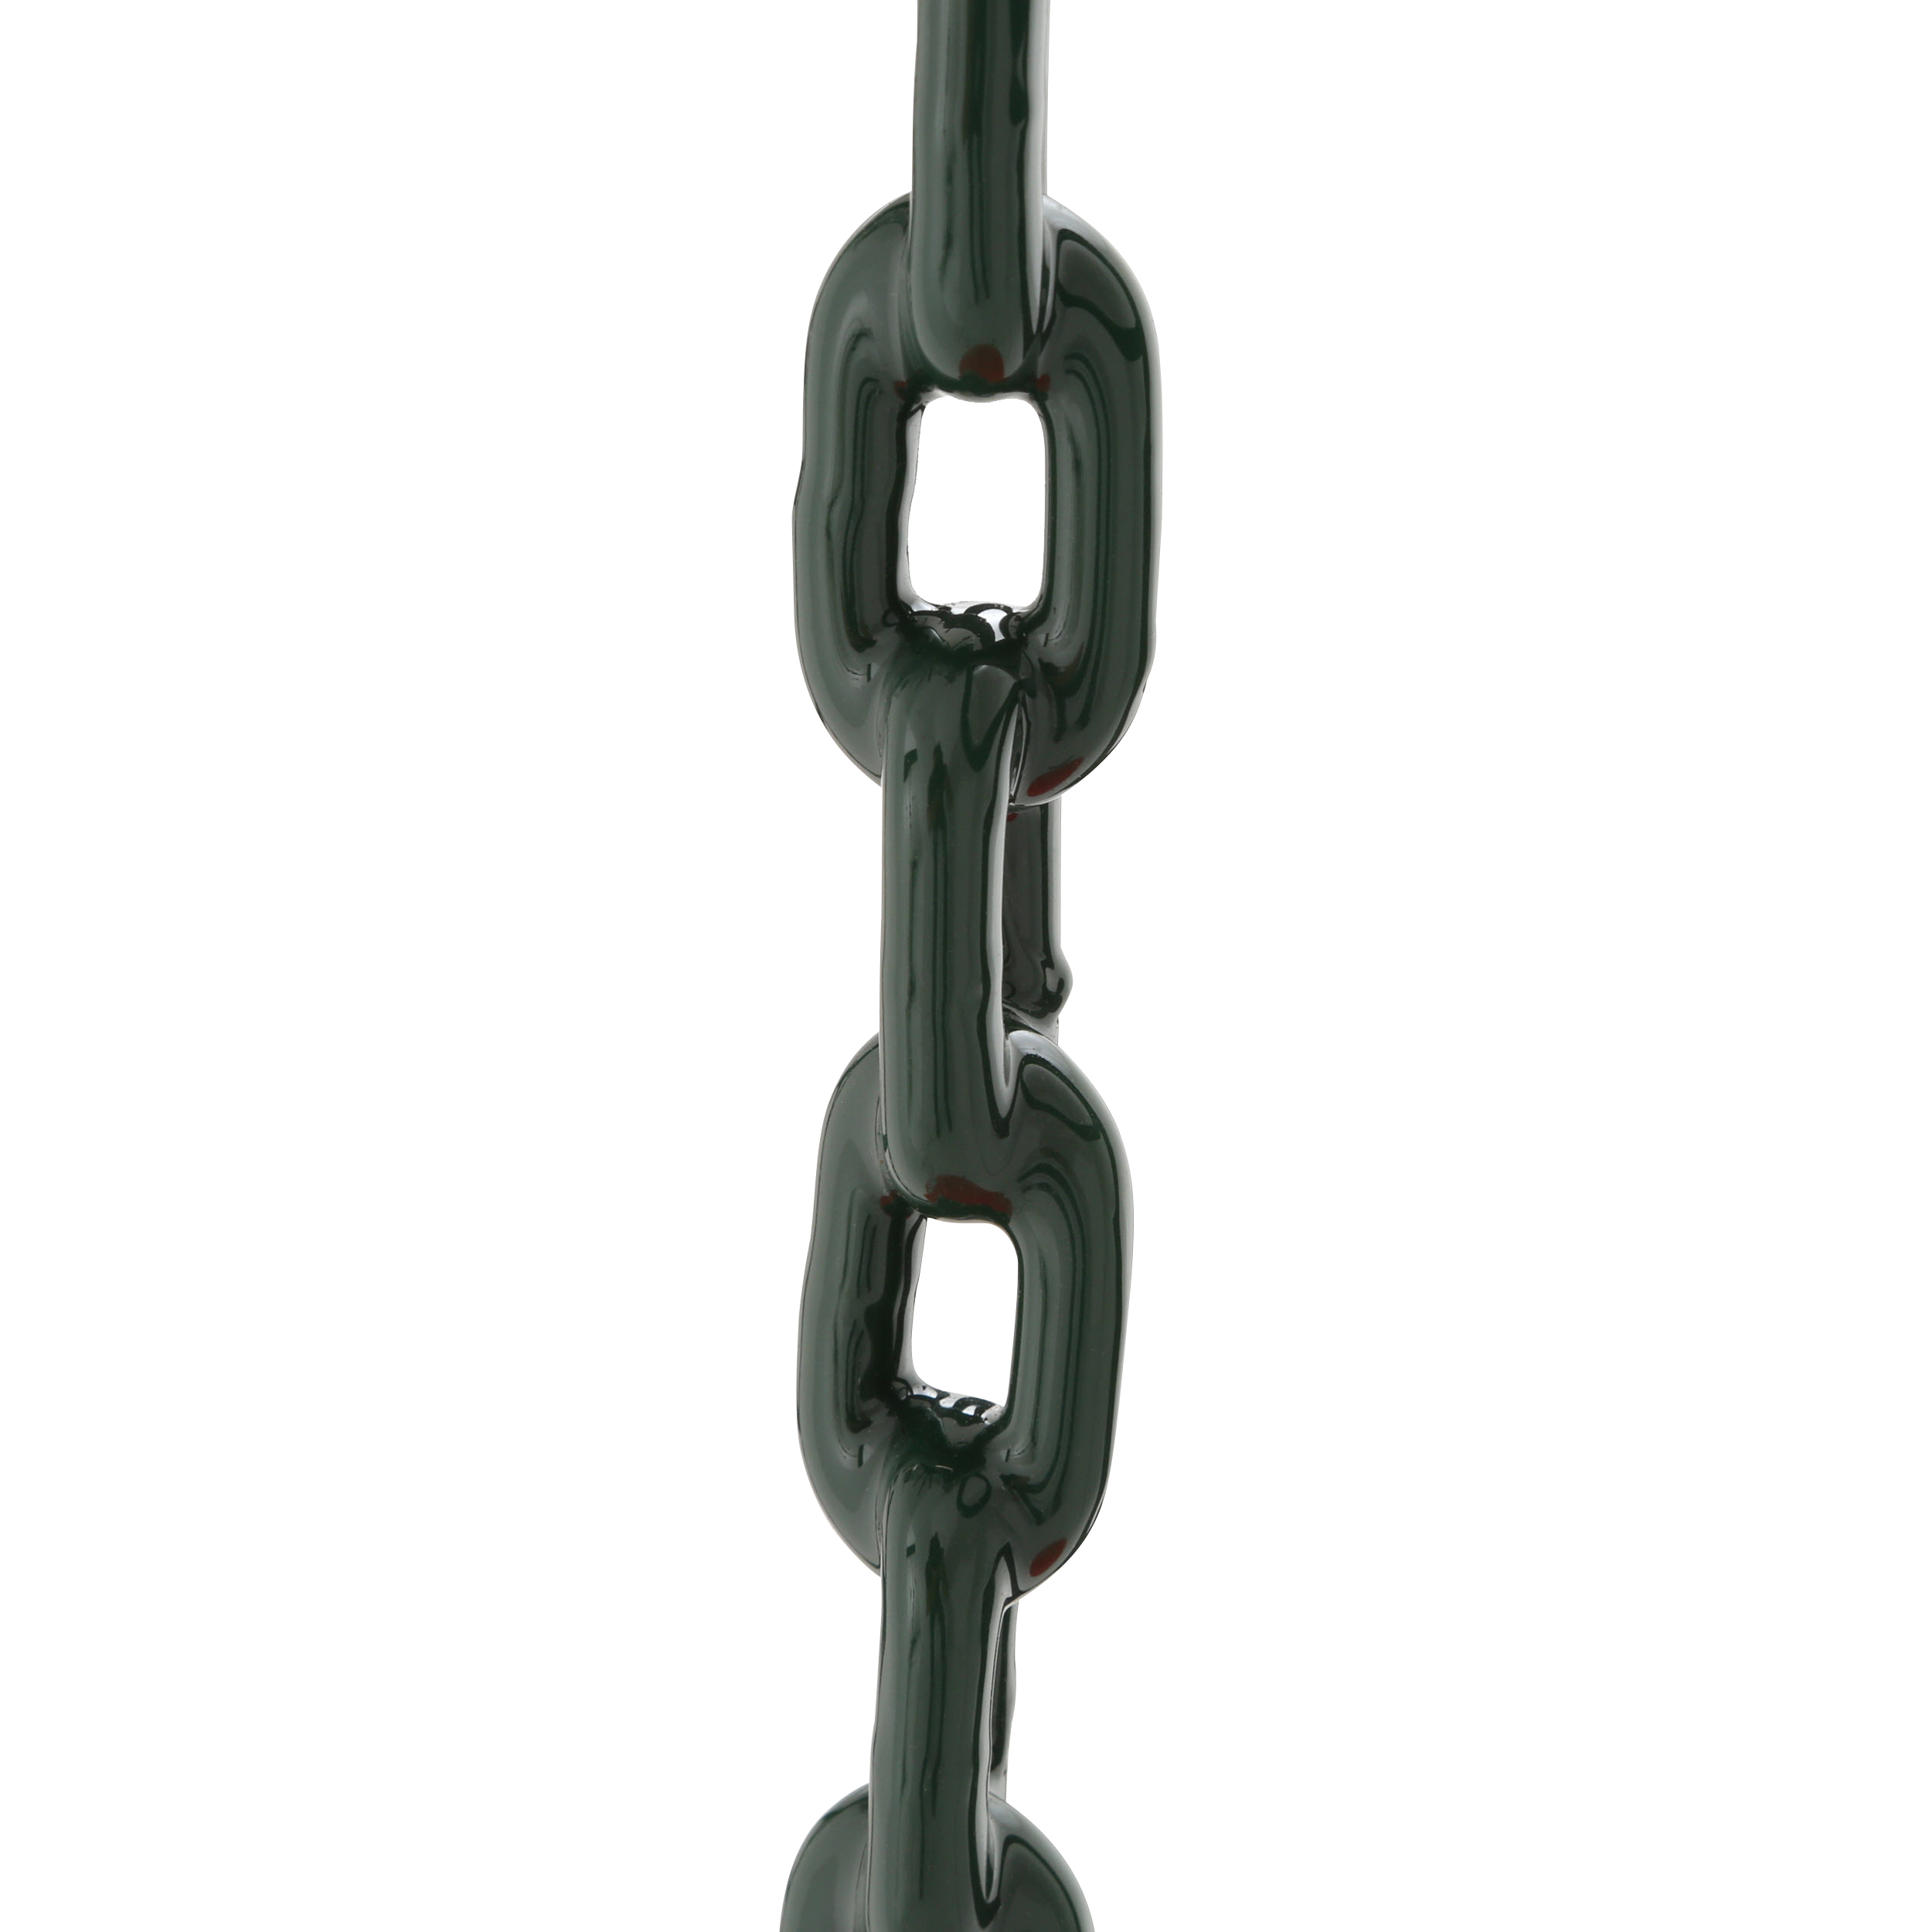 Gorilla Playsets Buoy Ball with Chain &amp; Clips - image 5 of 8